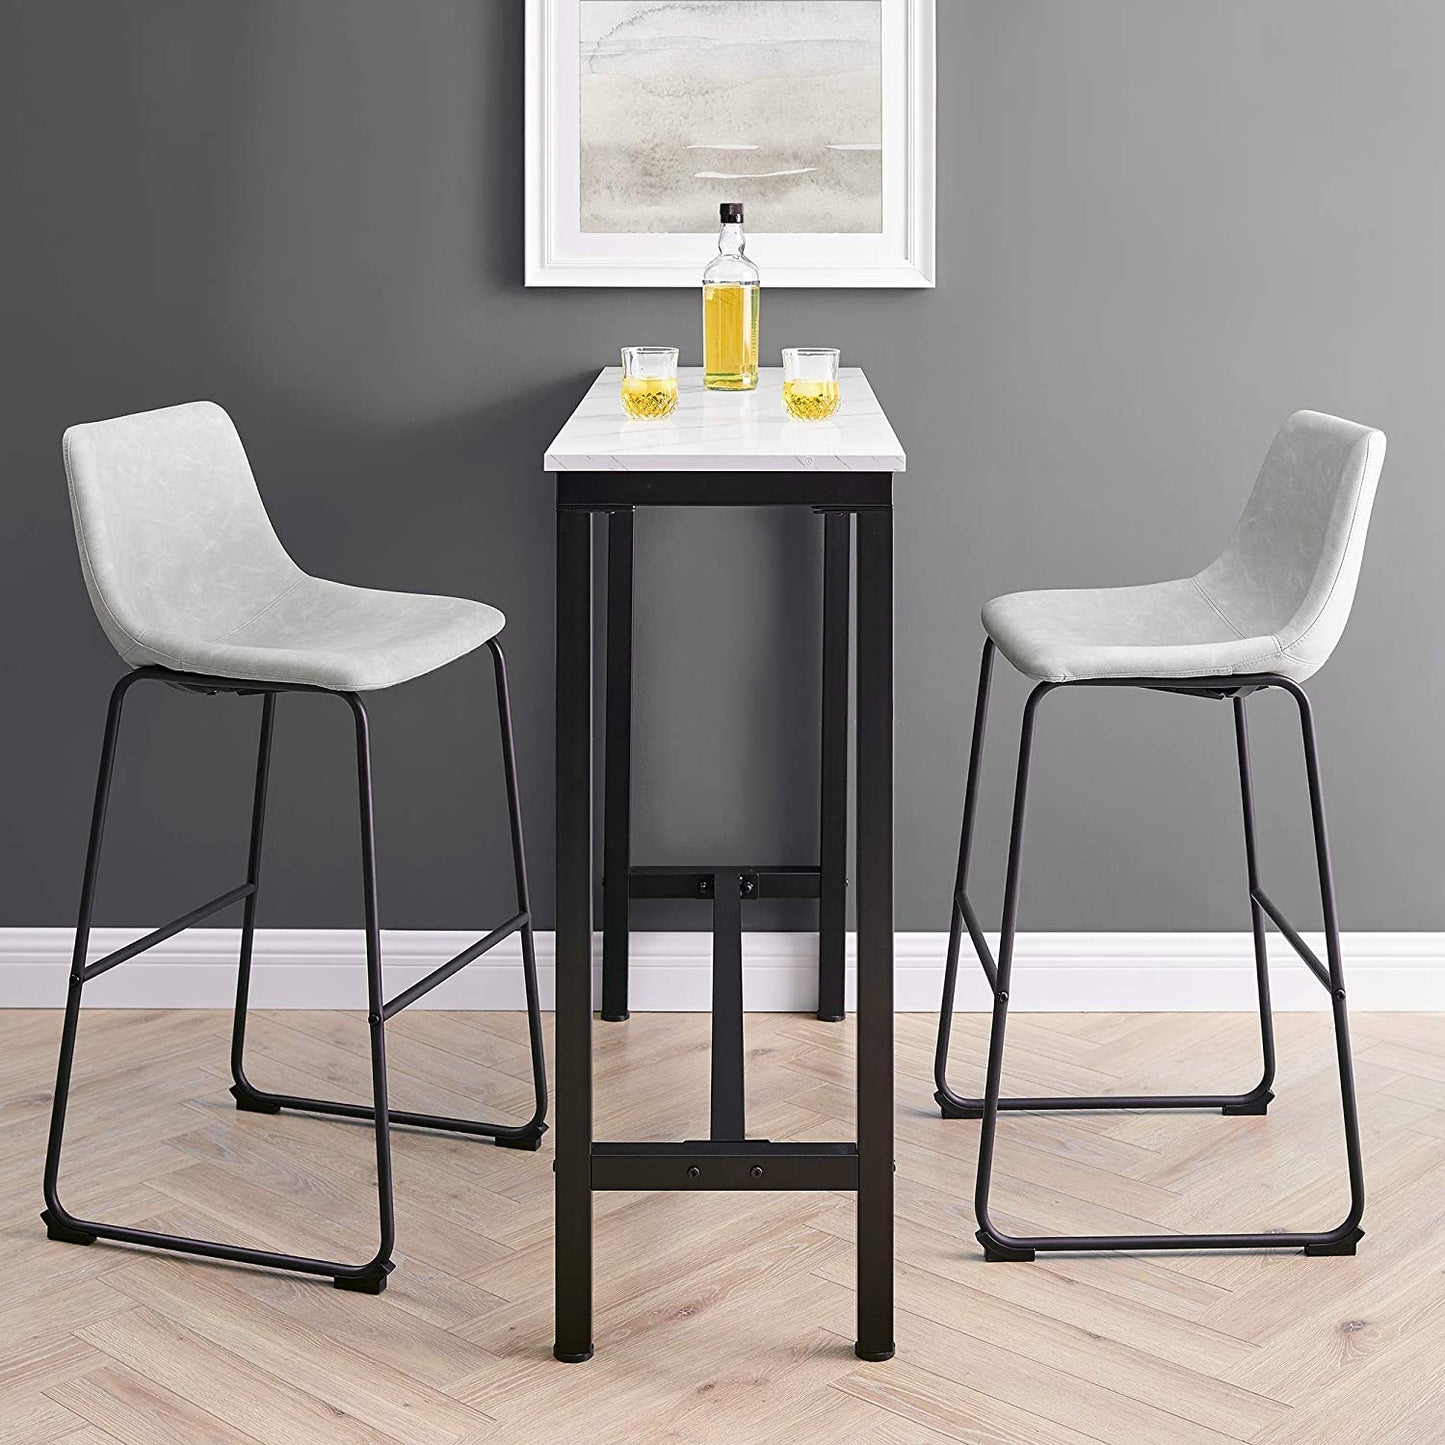 Bar Stool: Urban Industrial Faux Leatherette Armless Bar Chairs, Set of 2